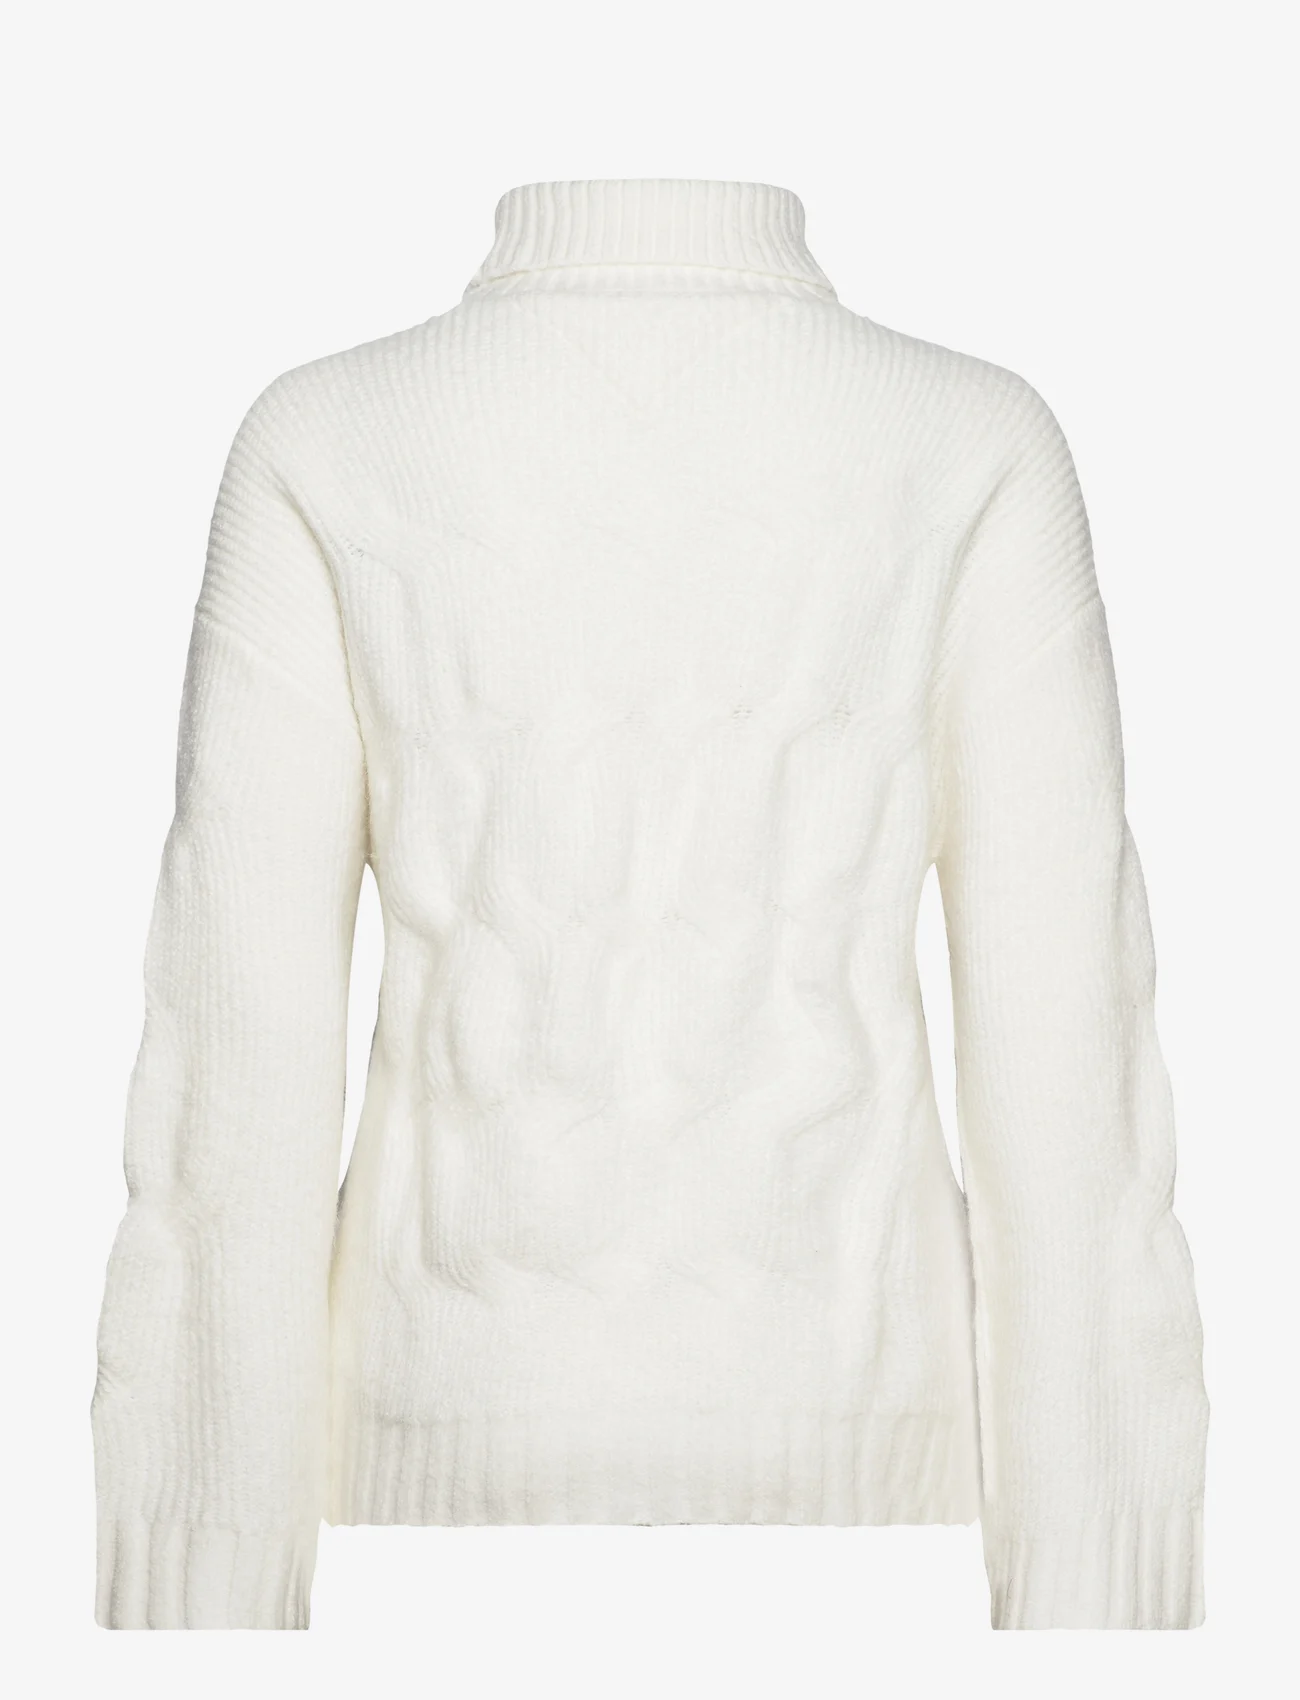 Tommy Jeans - TJW BADGE TRTLNK CABLE SWEATER - rollkragenpullover - ancient white - 1